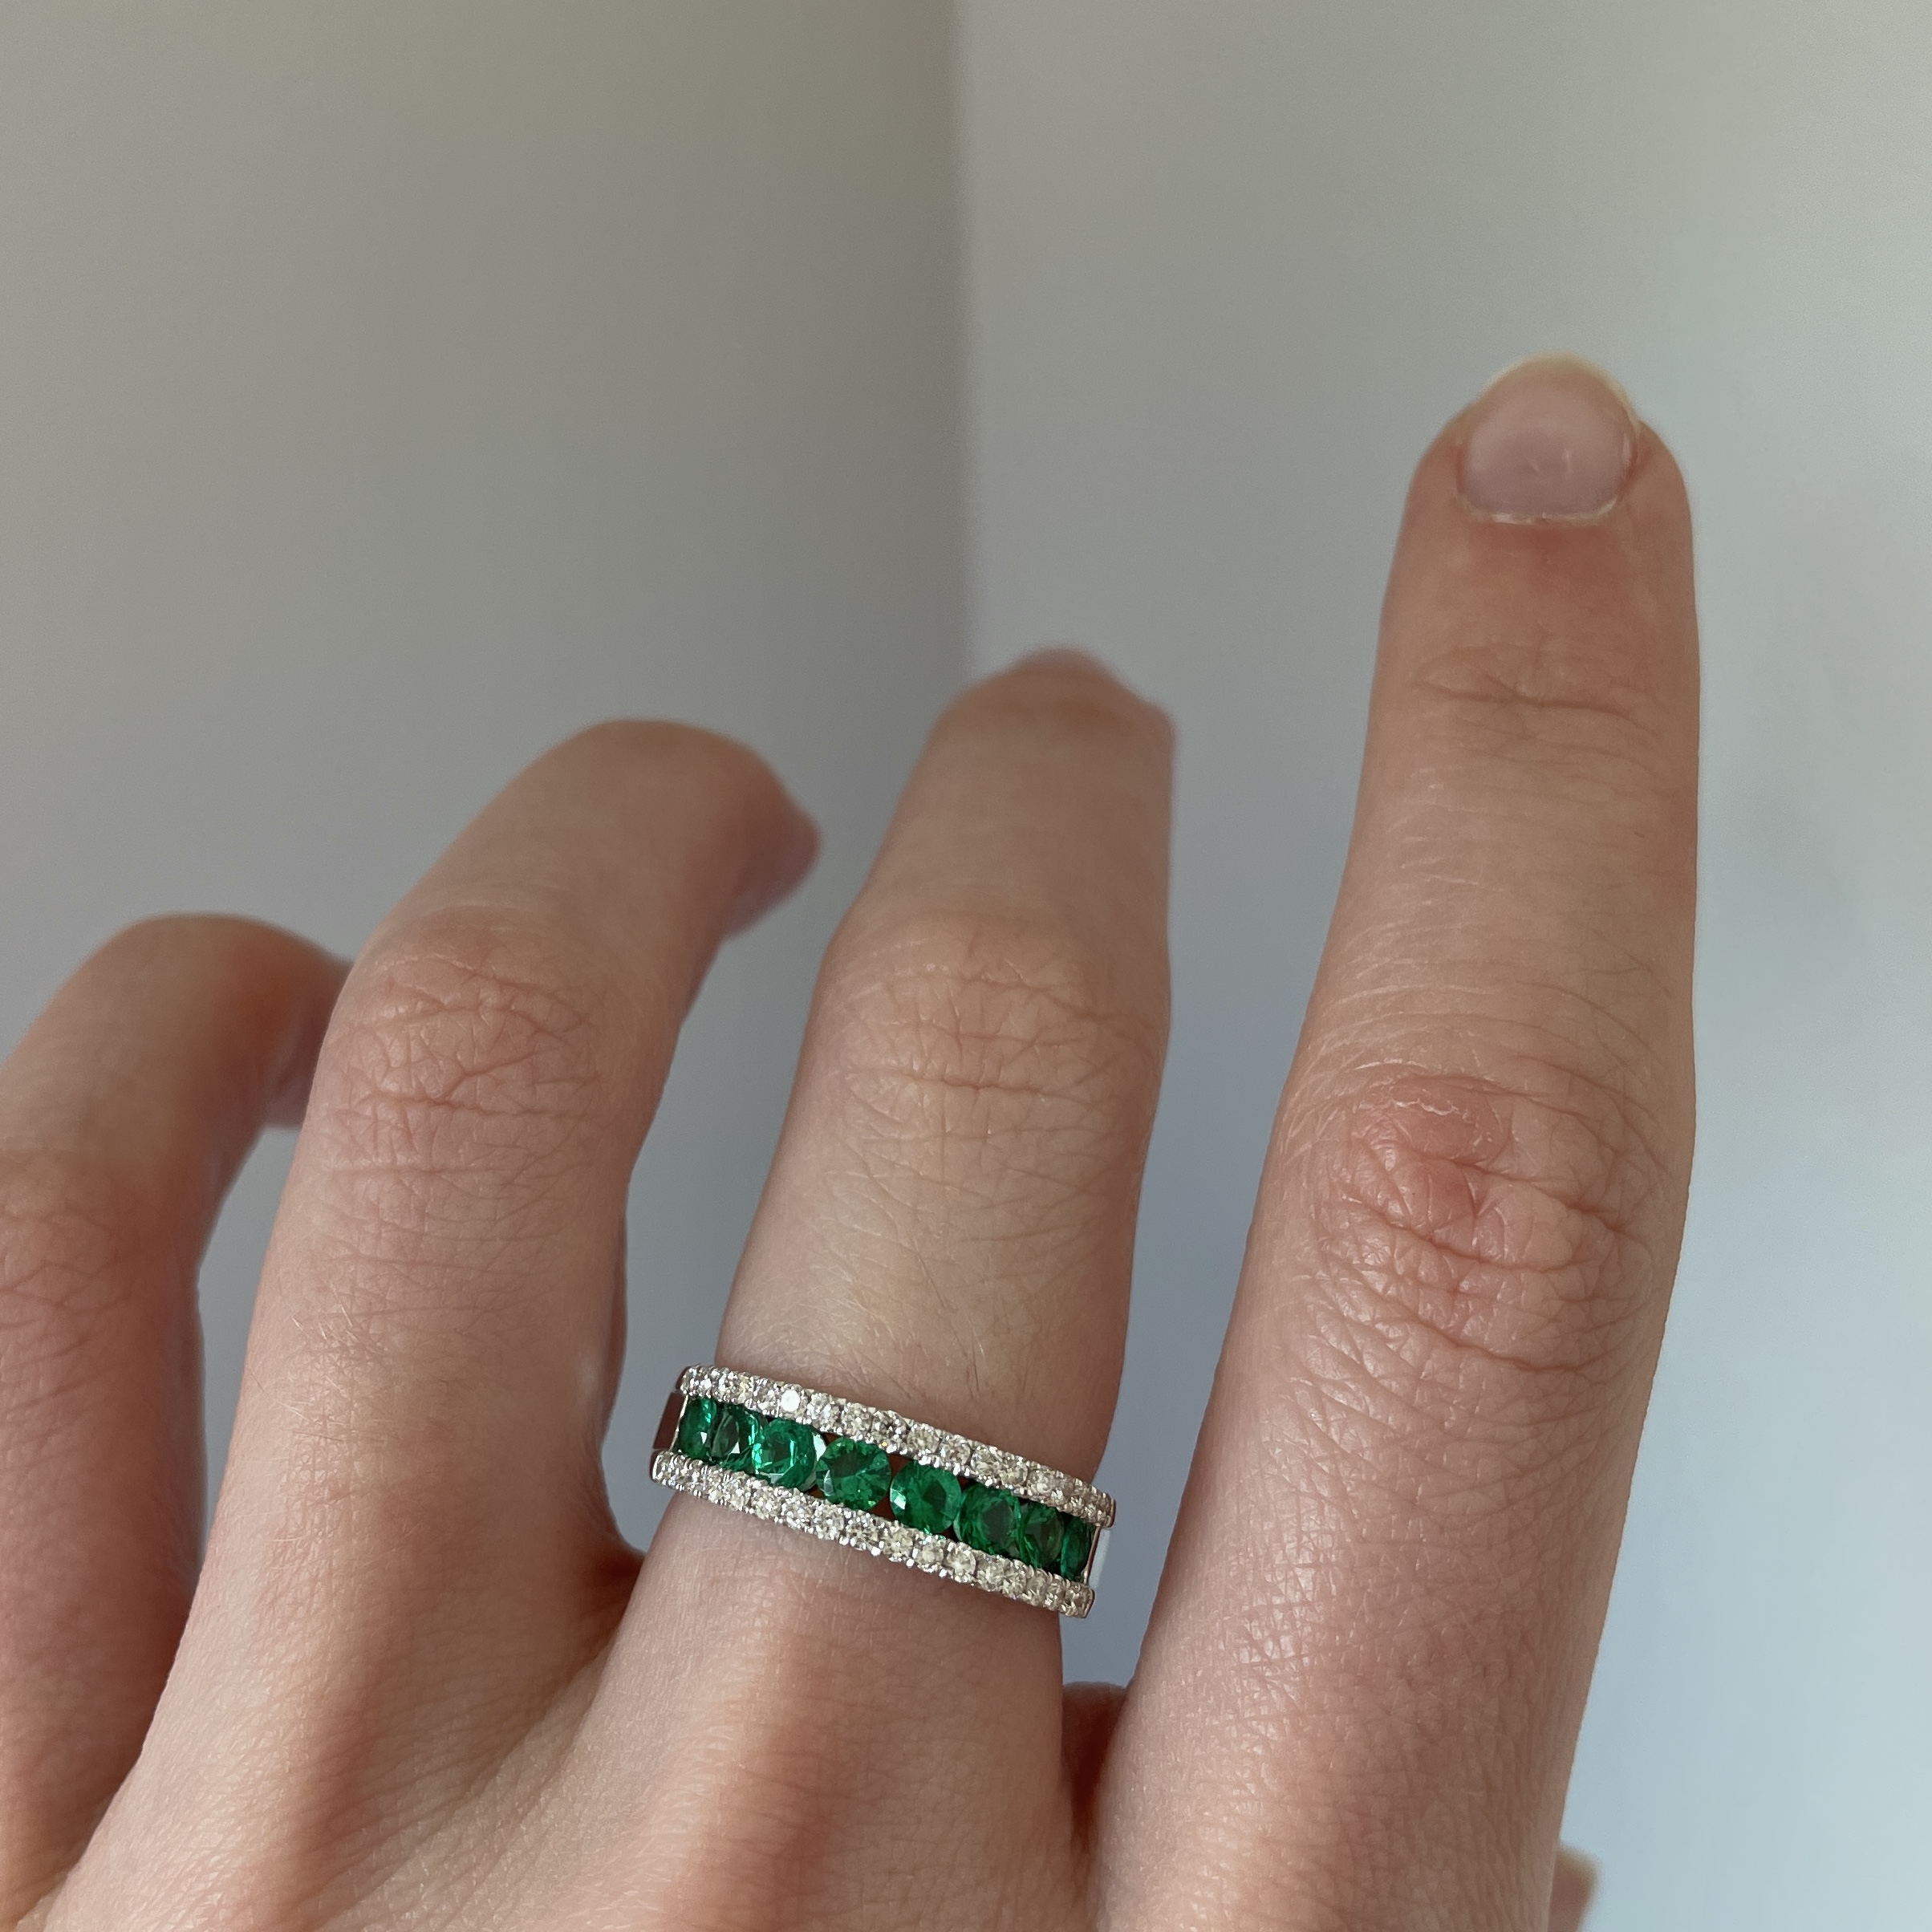 White Gold Emerald and Diamond Stacked Ring